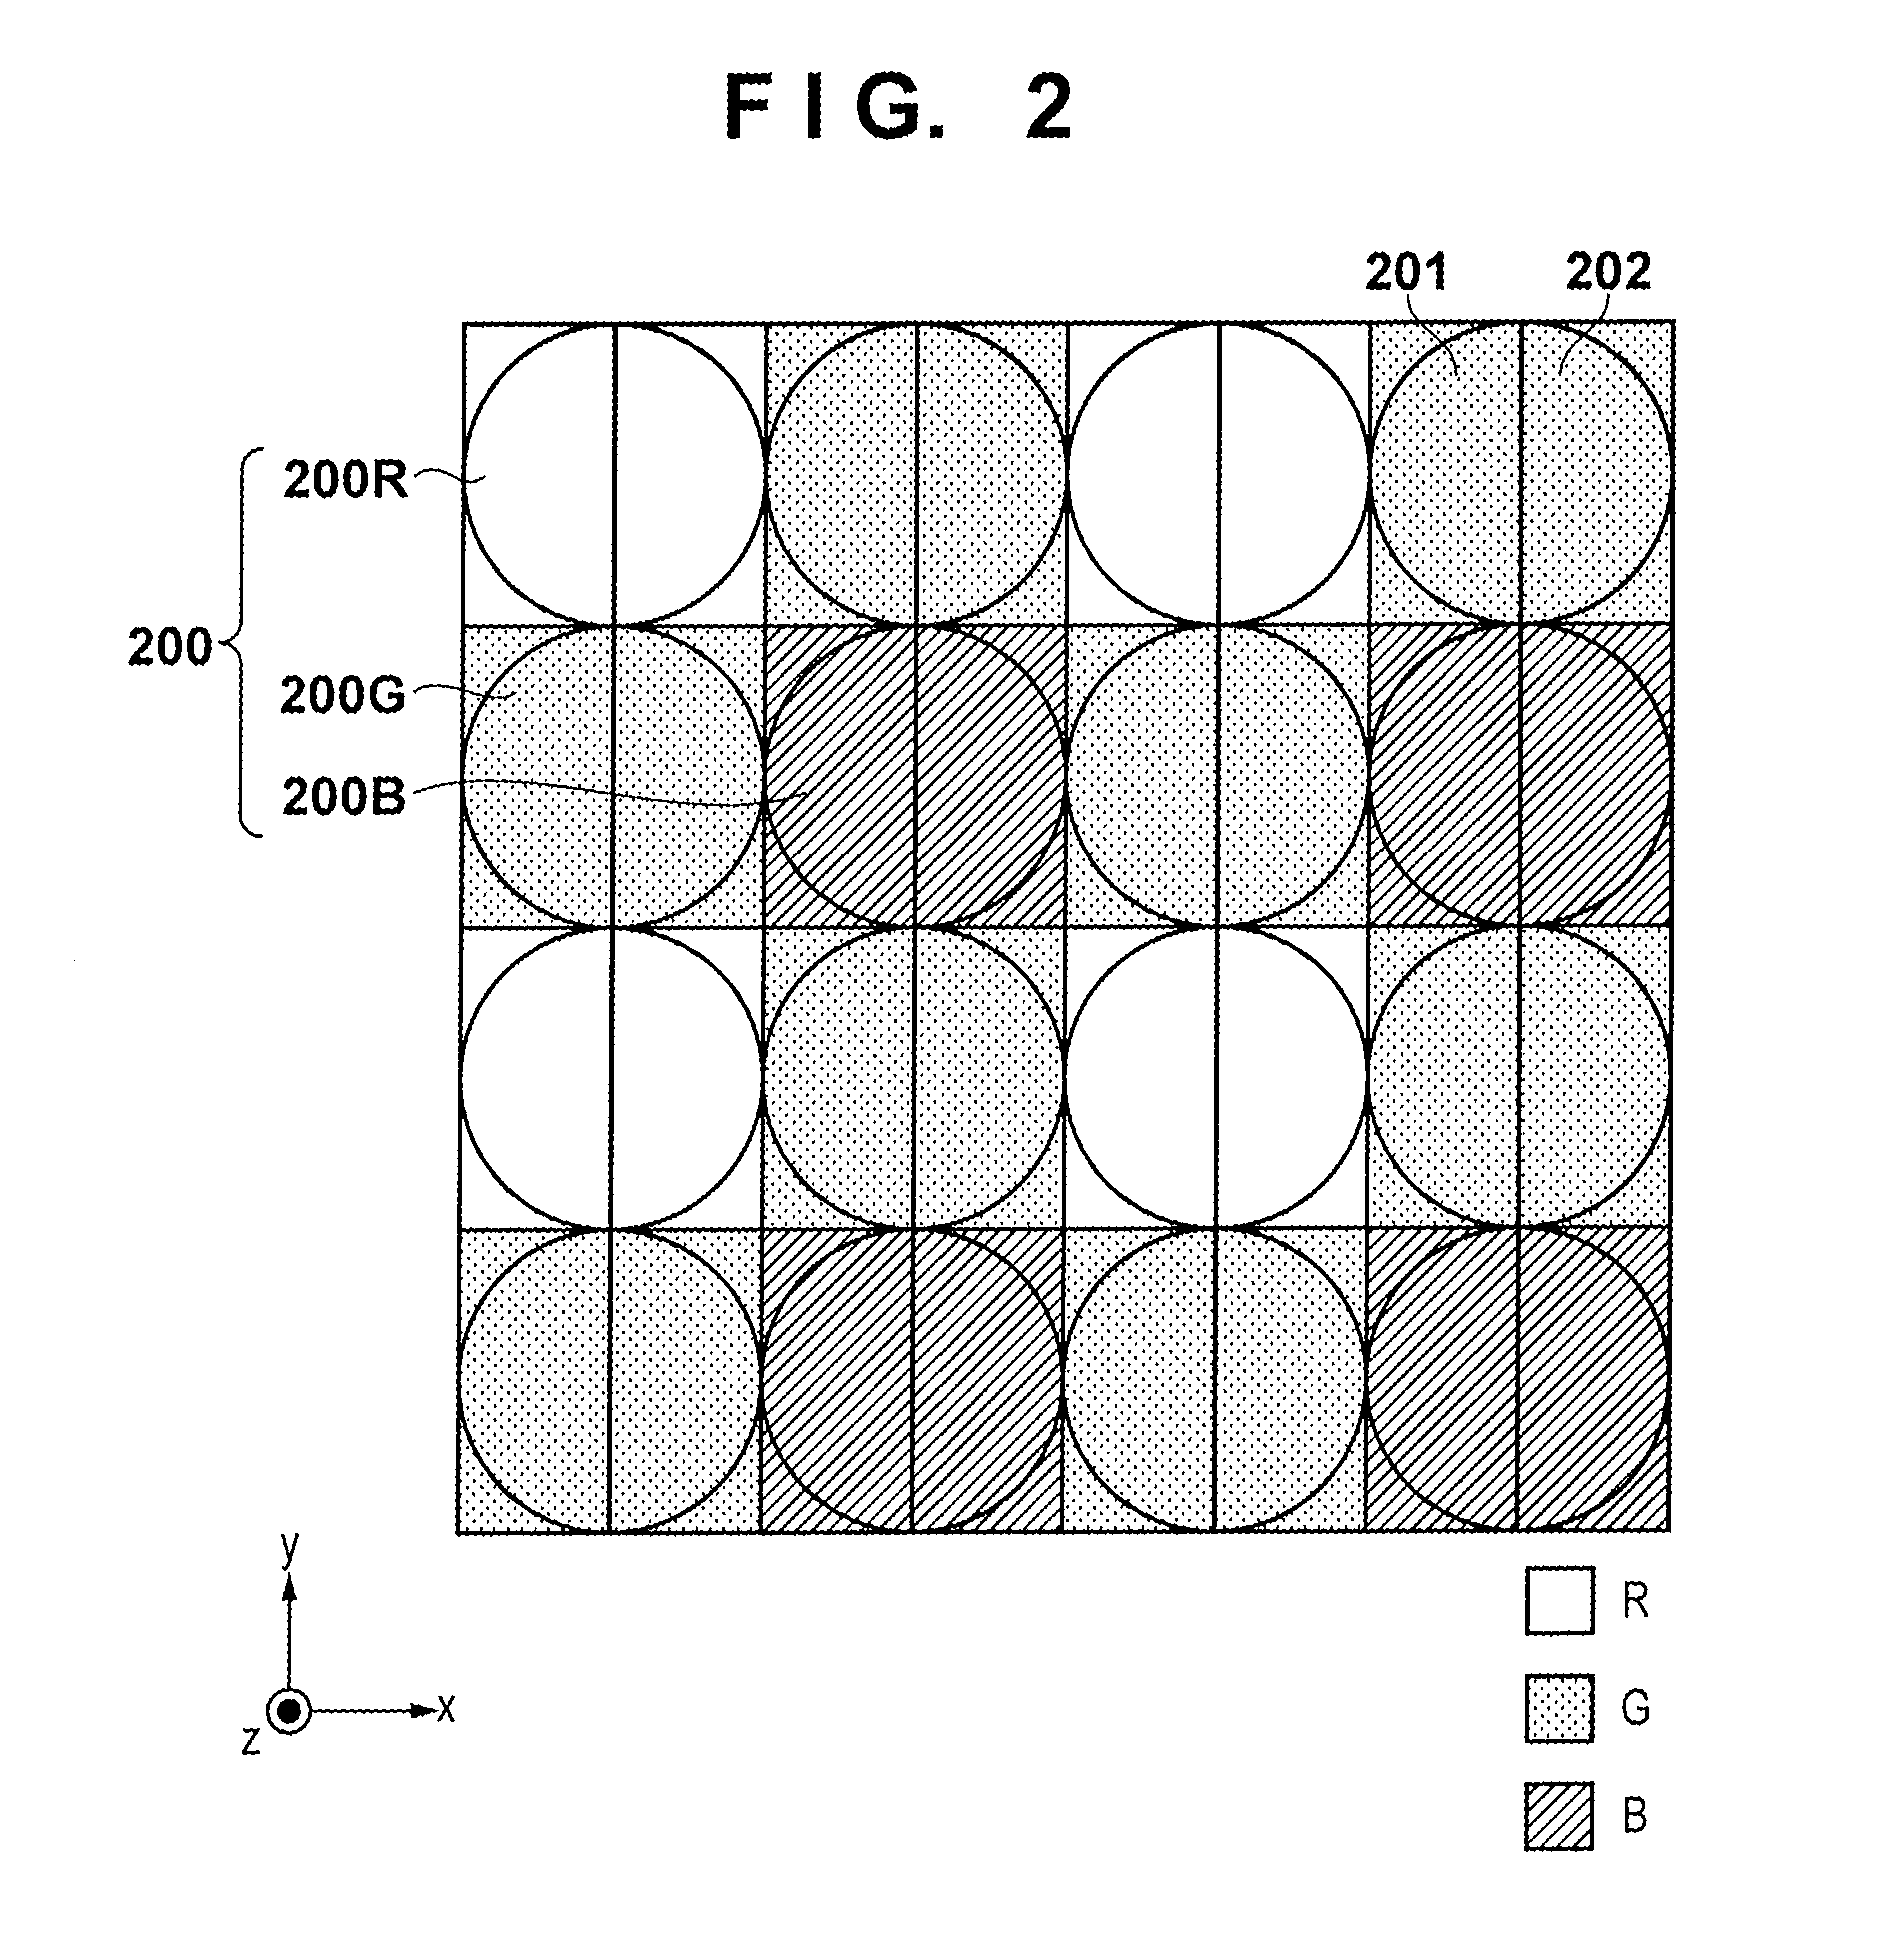 Image capturing apparatus and method of controlling the same